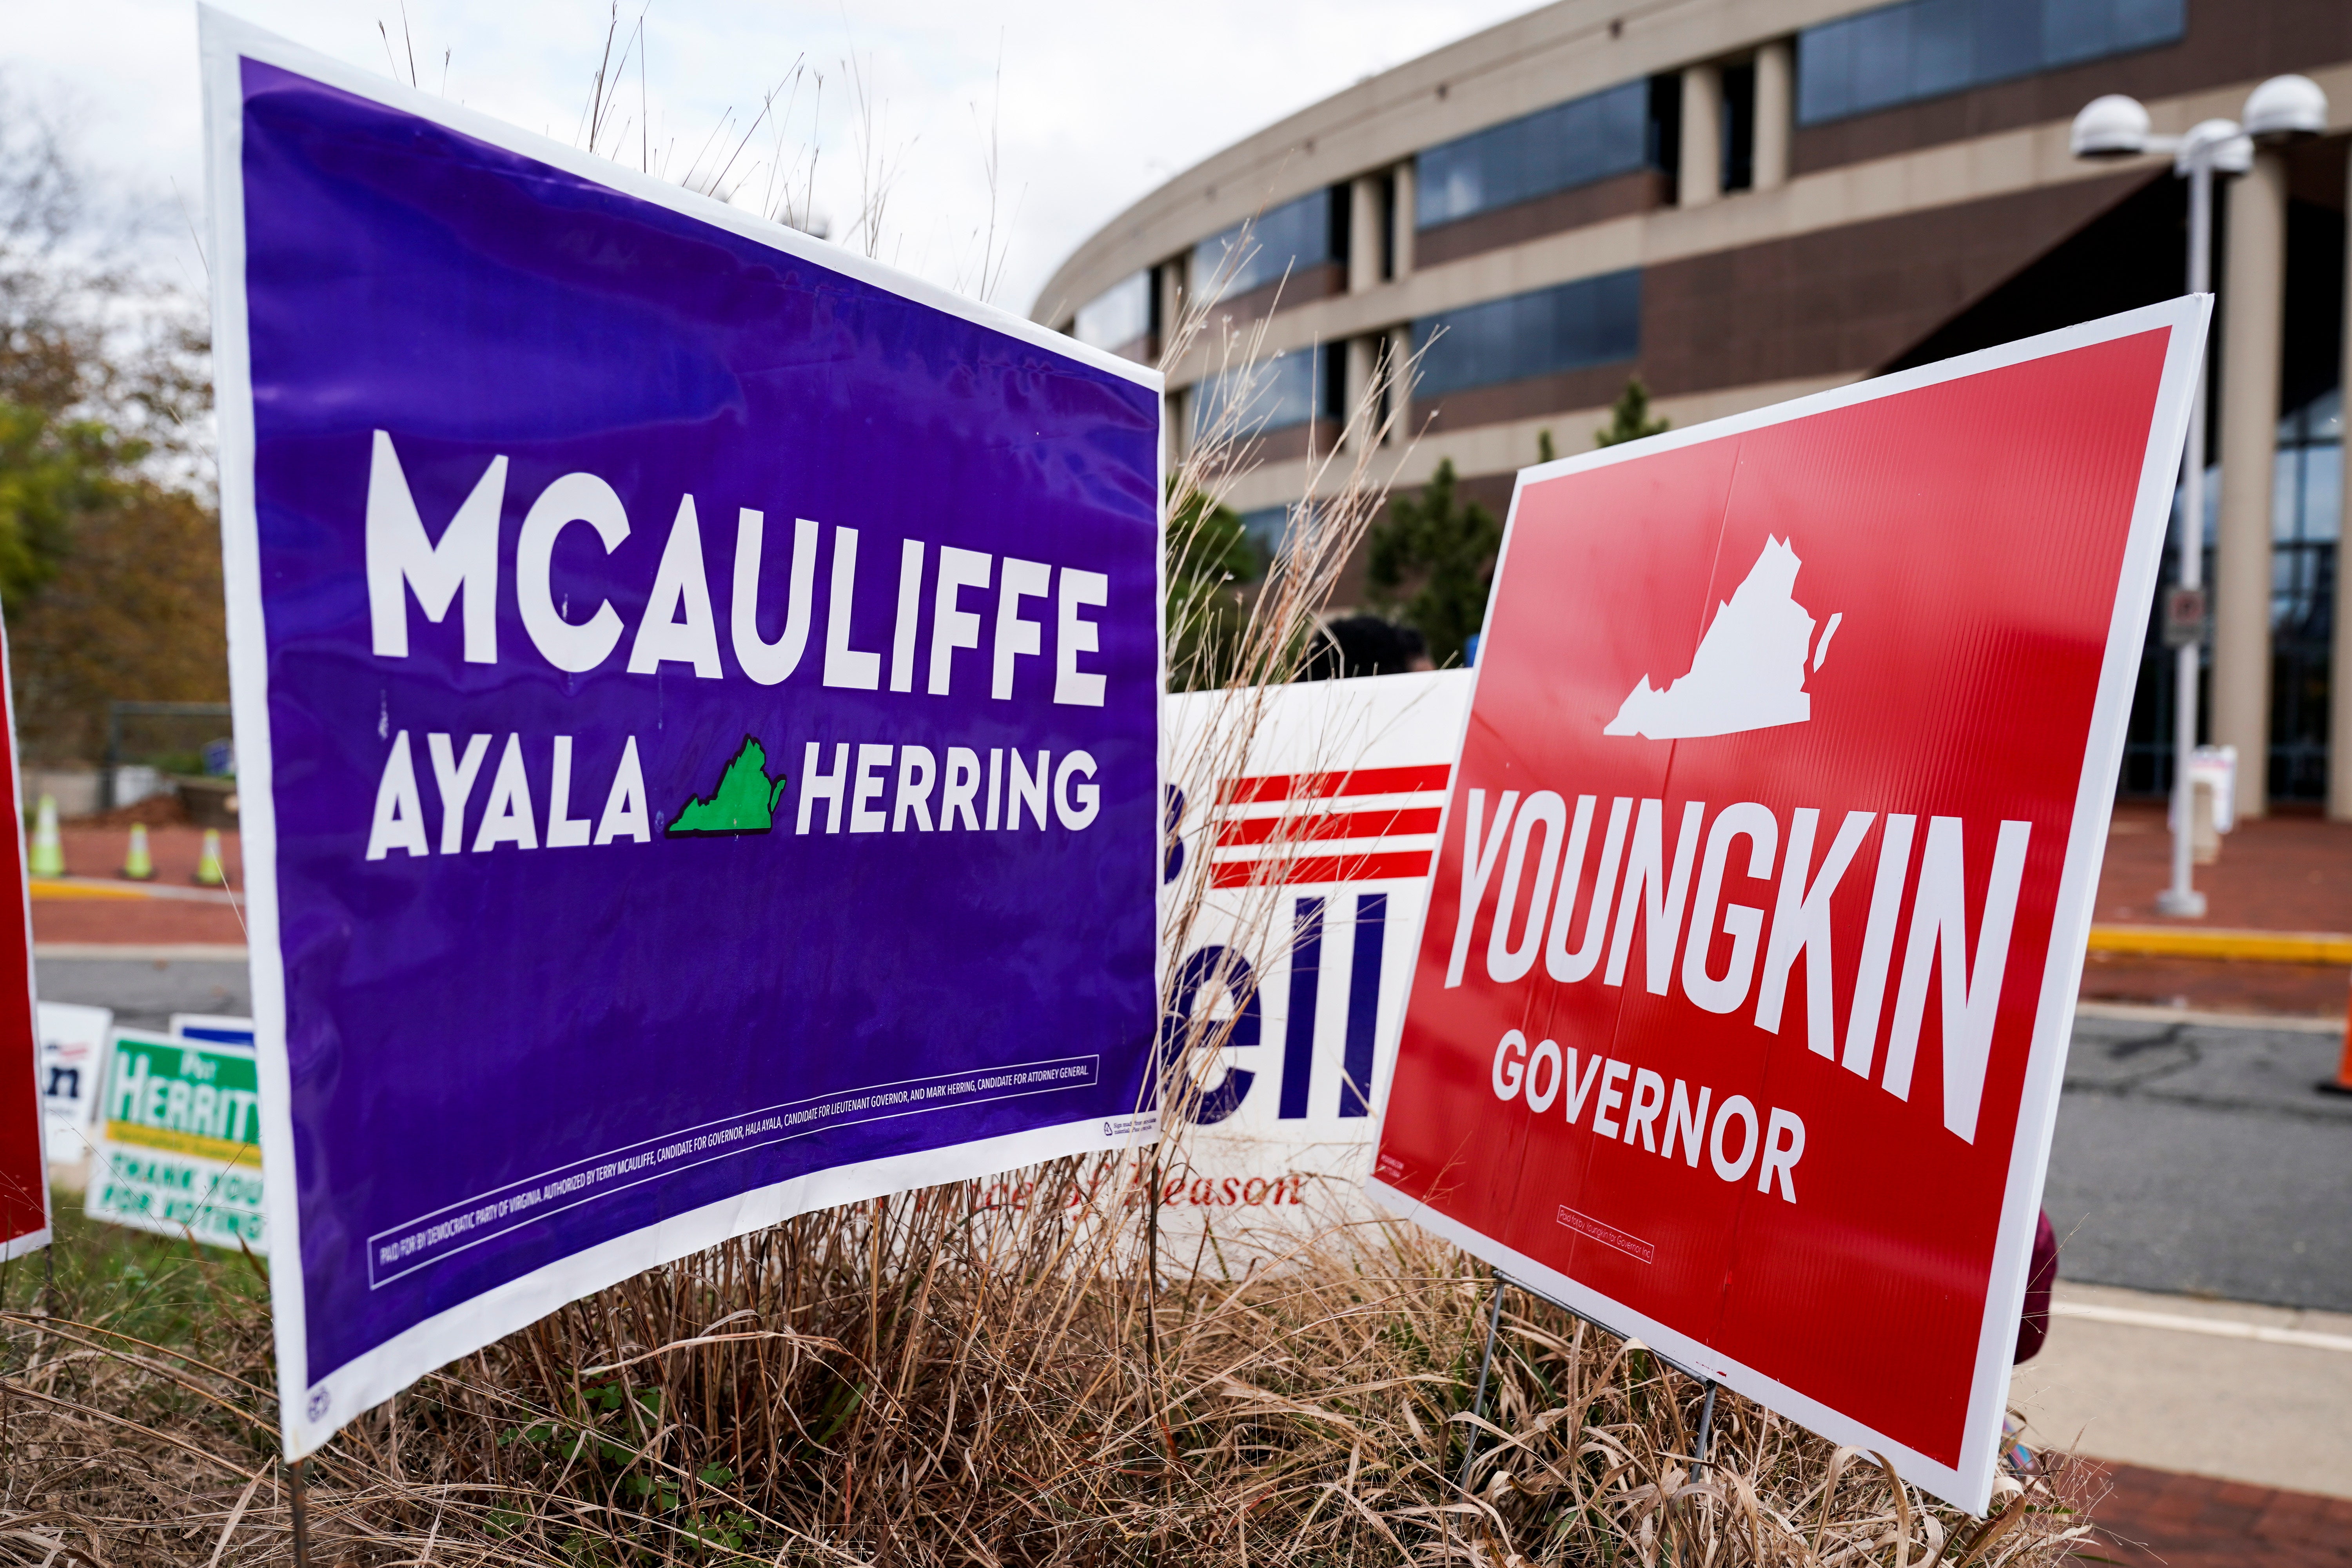 Newt Gingrich: Youngkin vs. McAuliffe and a tale of two radical, almost diametrically opposed strategies